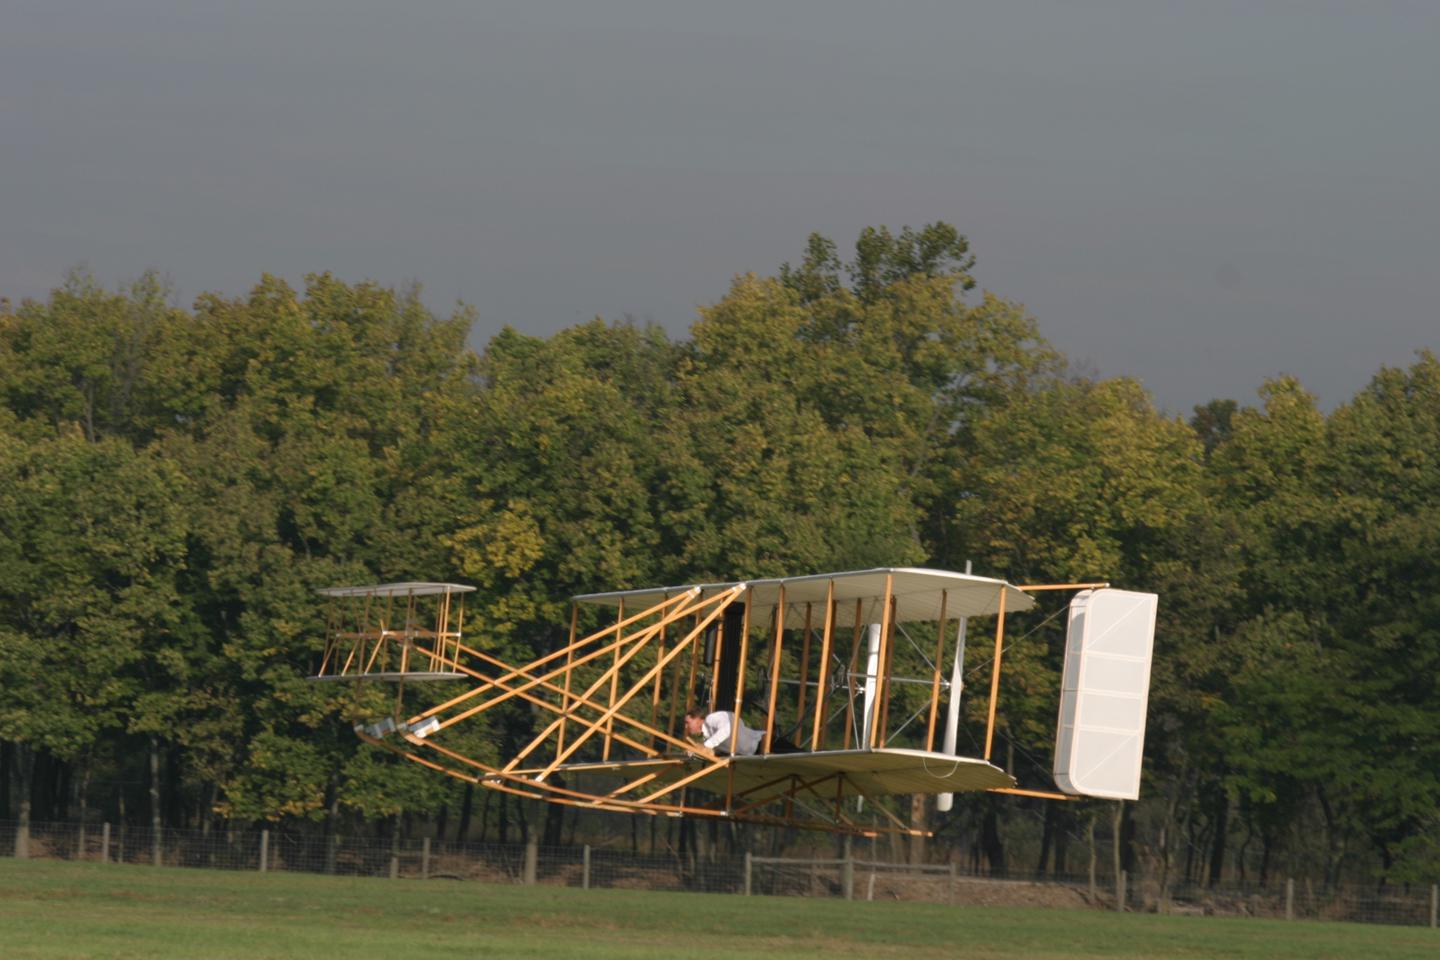 1905 Wright Flyer replicaThe 1905 Wright Flyer replica during a demonstration flight.